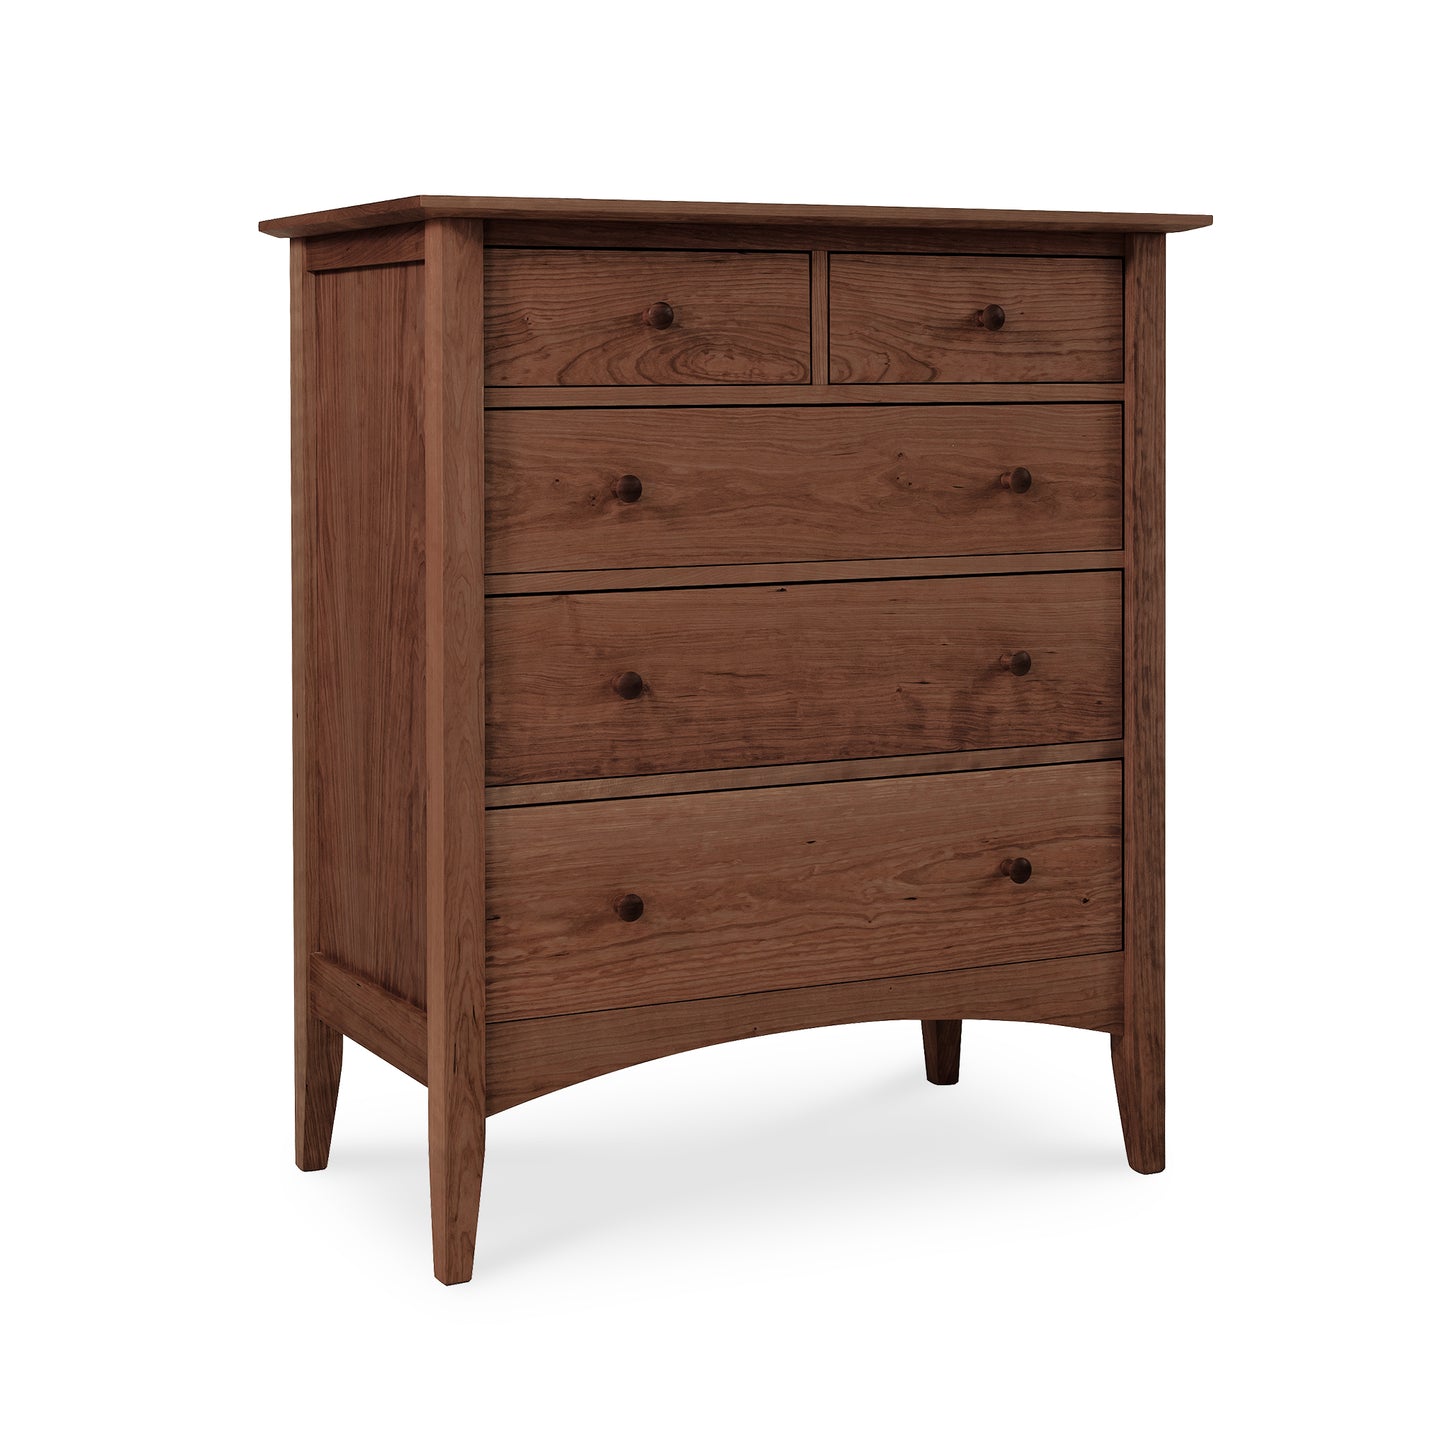 A Maple Corner Woodworks American Shaker 5-Drawer Chest in a rich brown finish, featuring a simple, traditional design with round knobs and slightly angled legs is part of the American Shaker Furniture Collection.